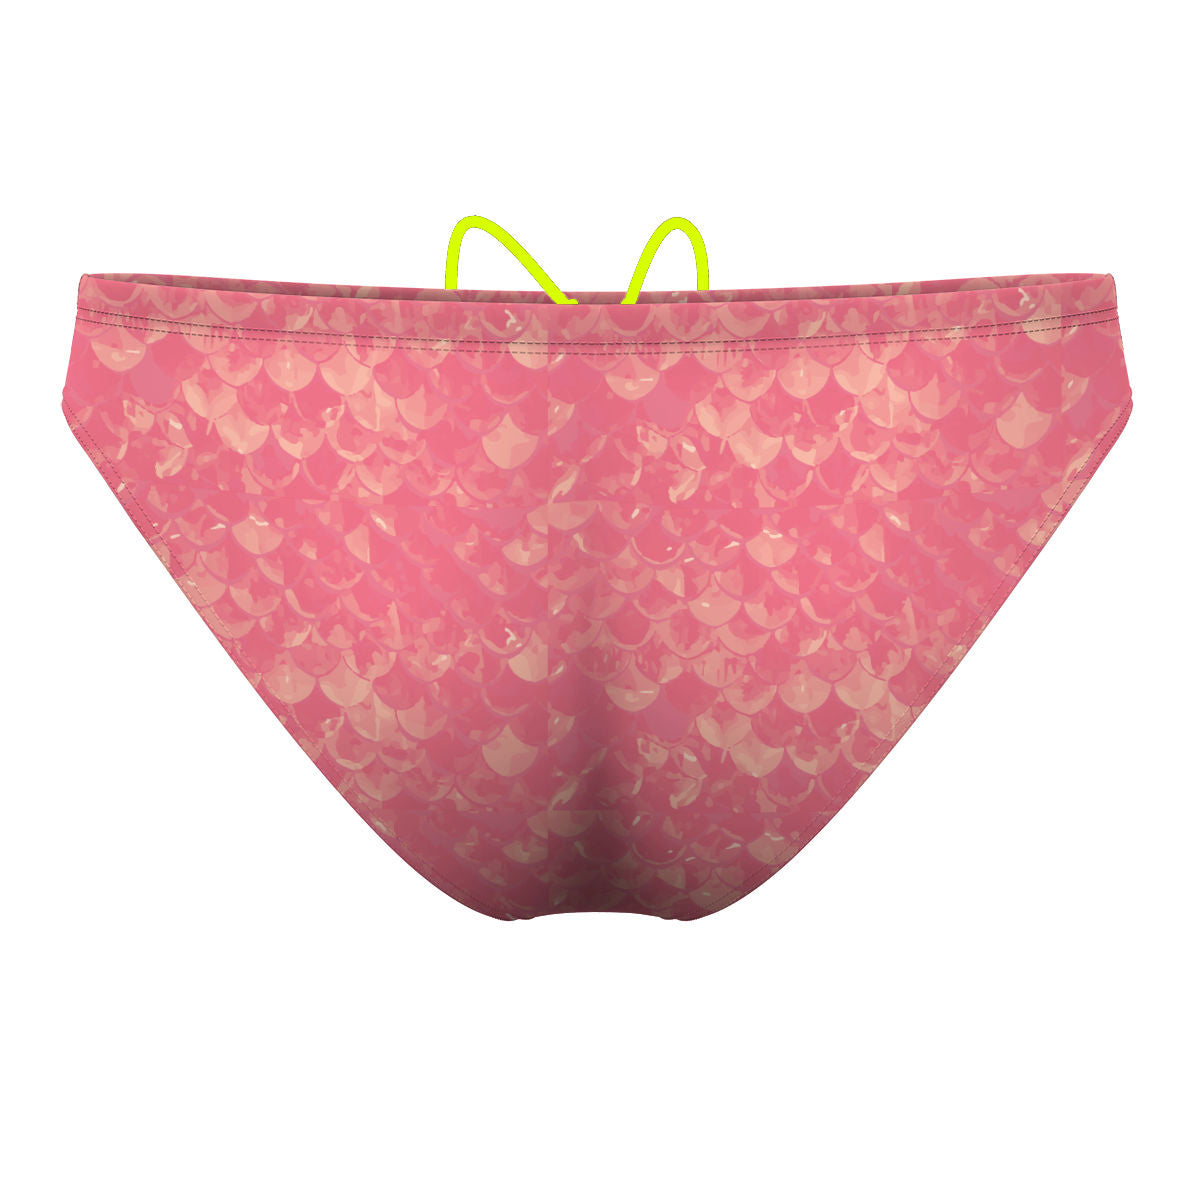 Mighty Mermaid - Waterpolo Brief Swimsuit